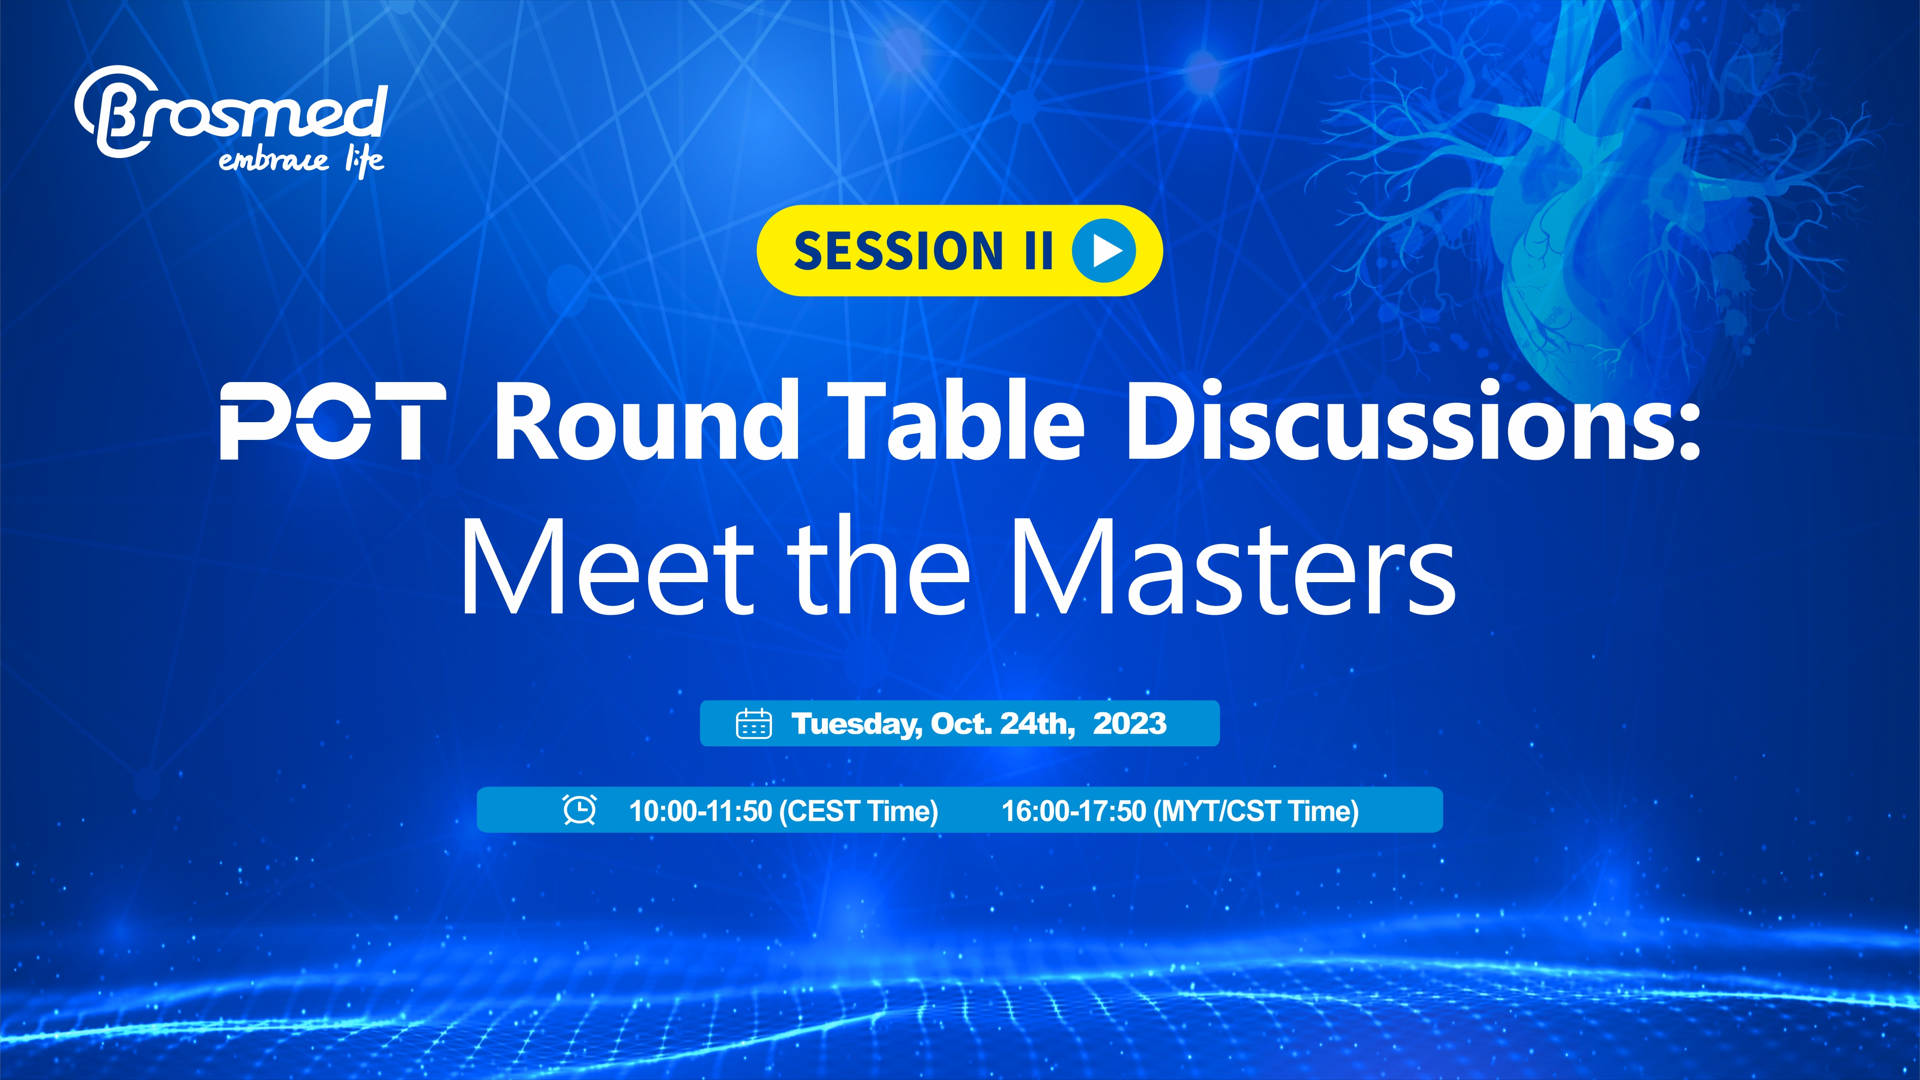 POT Round Table Discussions: Meet the Masters (Session II)